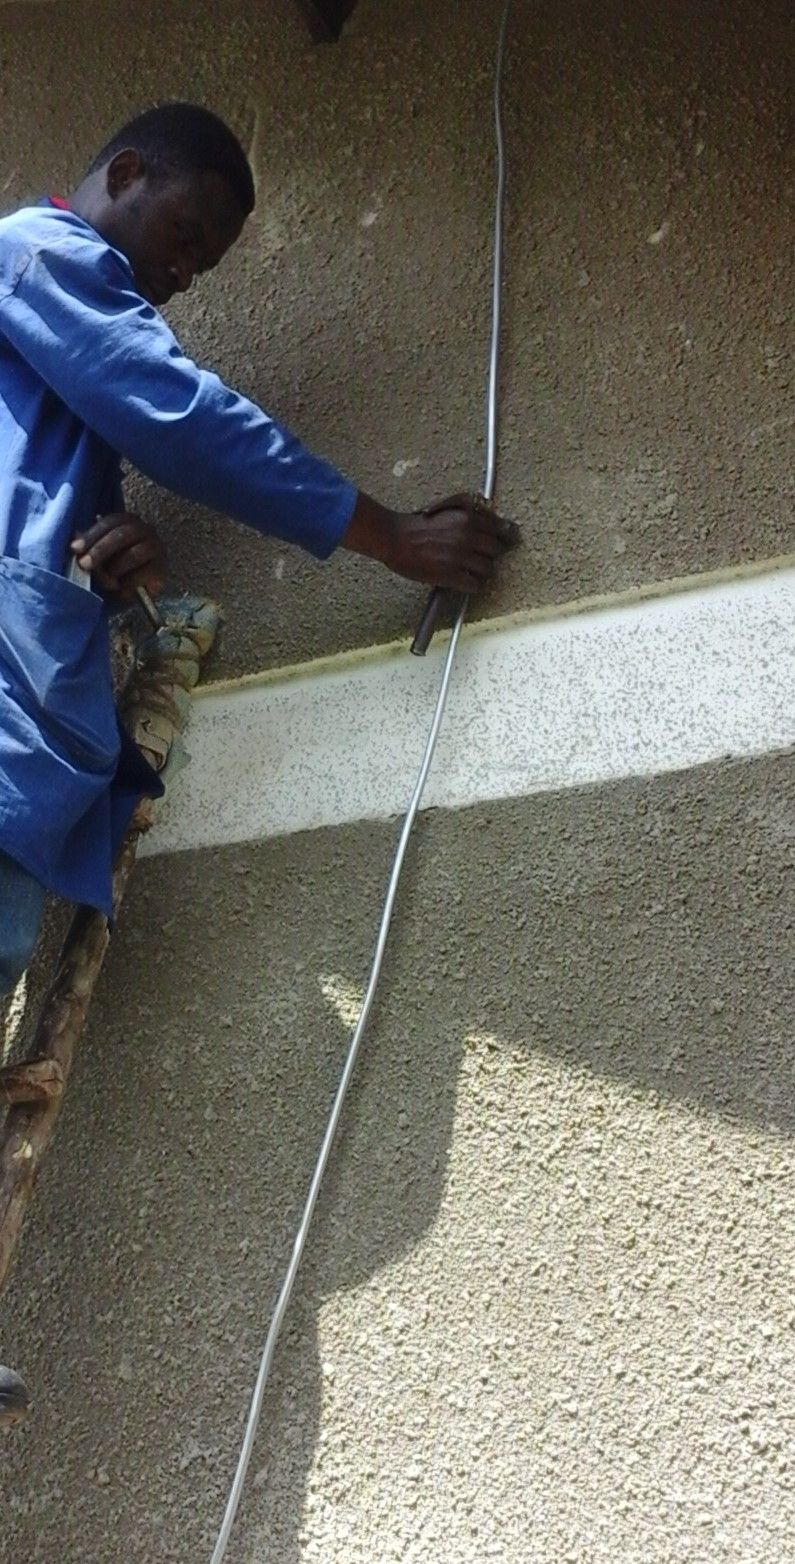 Installing down-conductors which carry lightning current from the lightning rods harmlessly to the earthing/grounding rings buried in trenches around each building